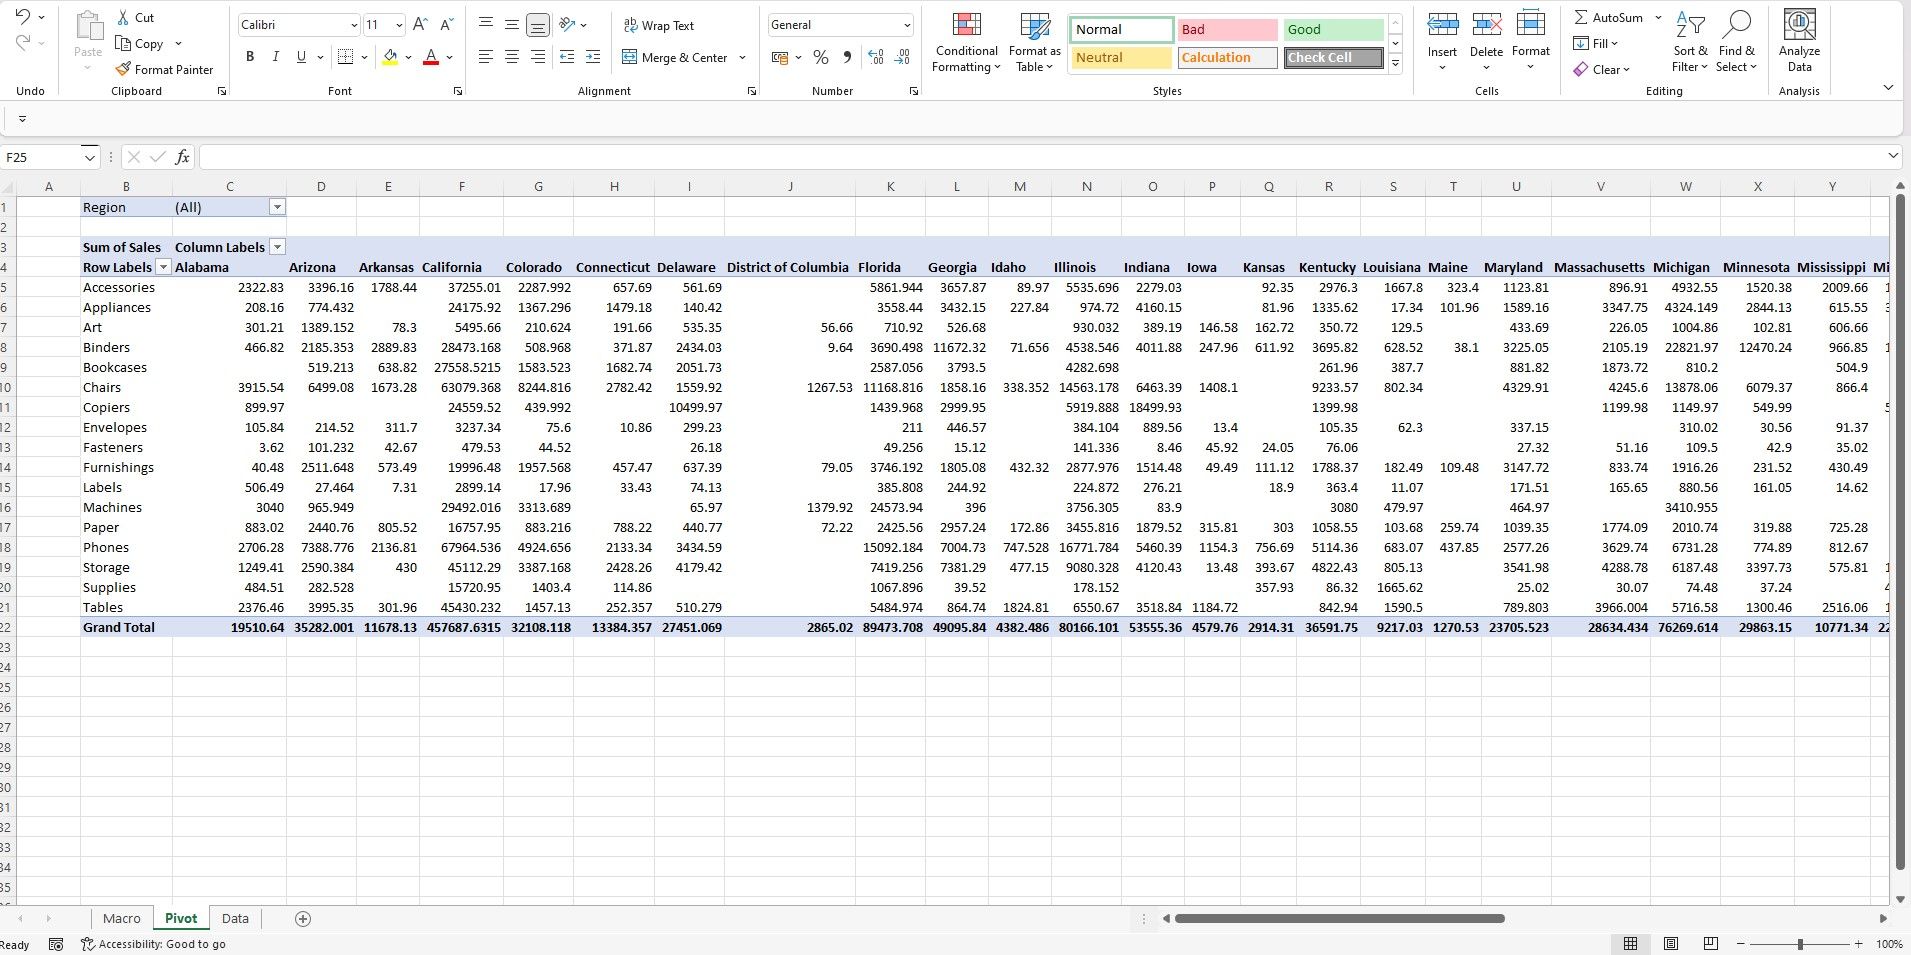 Pivot table with basic calculations for Sample Superstore data in MS Excel